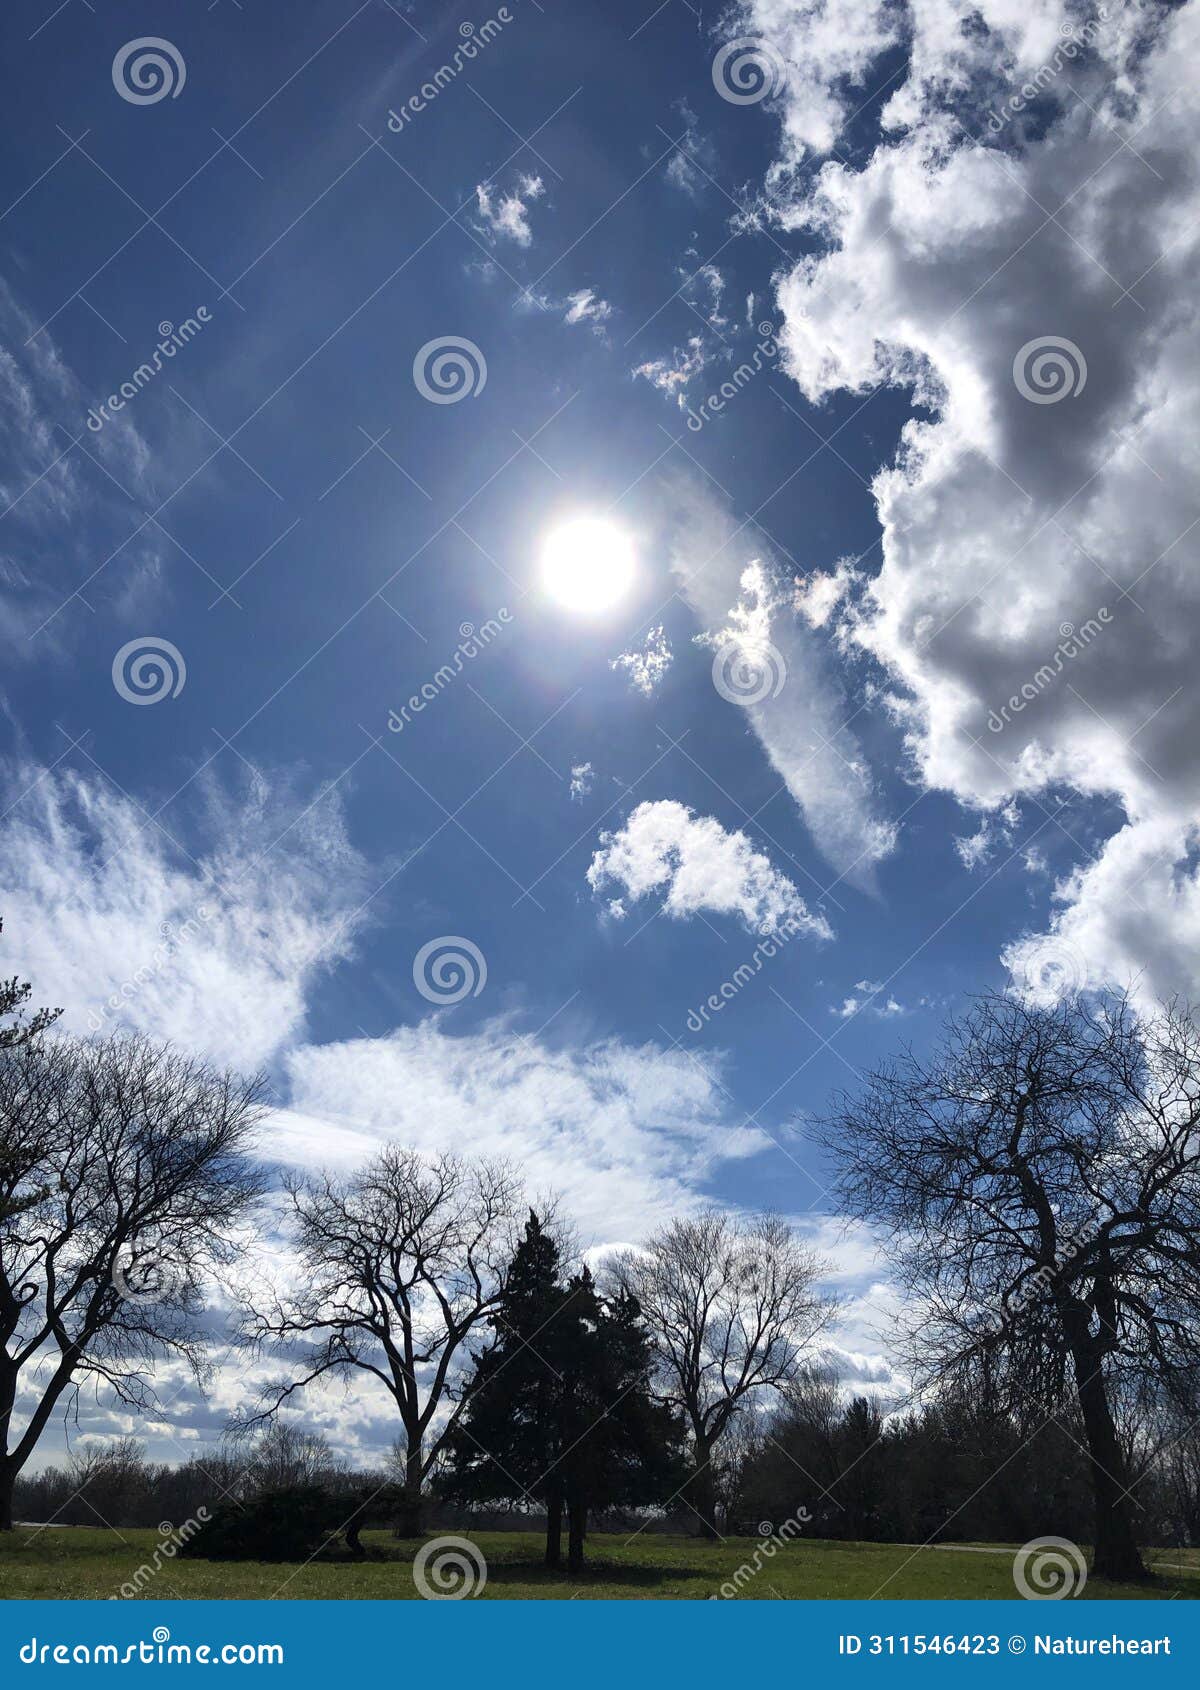 deep blue sky with various white clouds 8